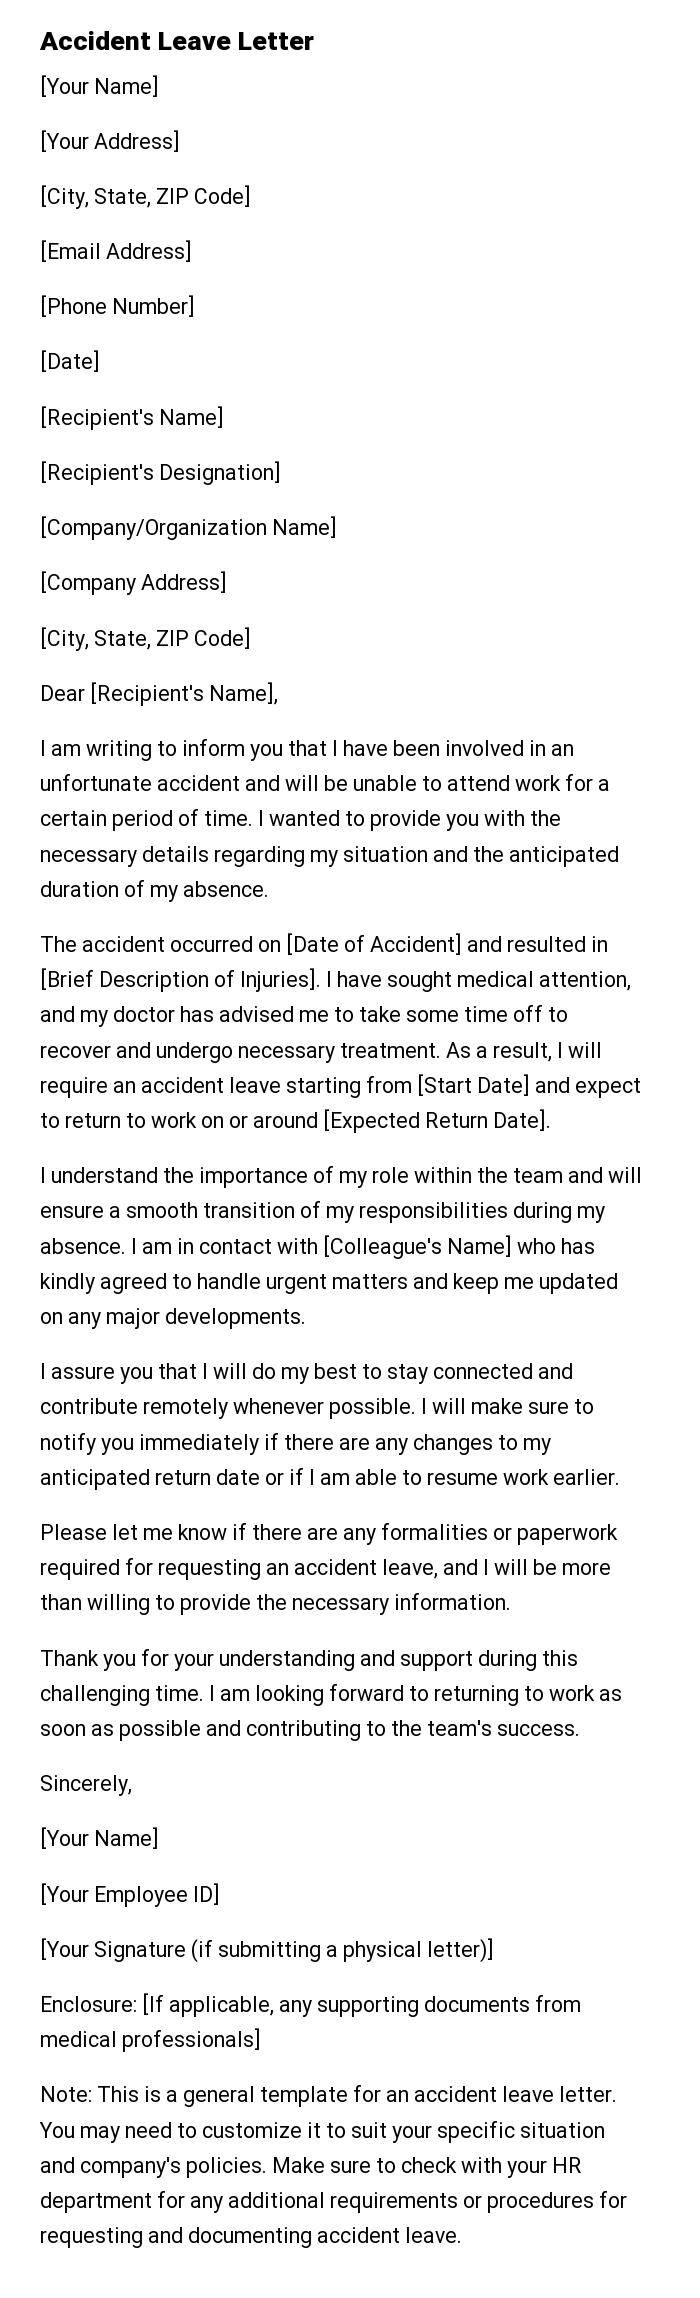 Accident Leave Letter